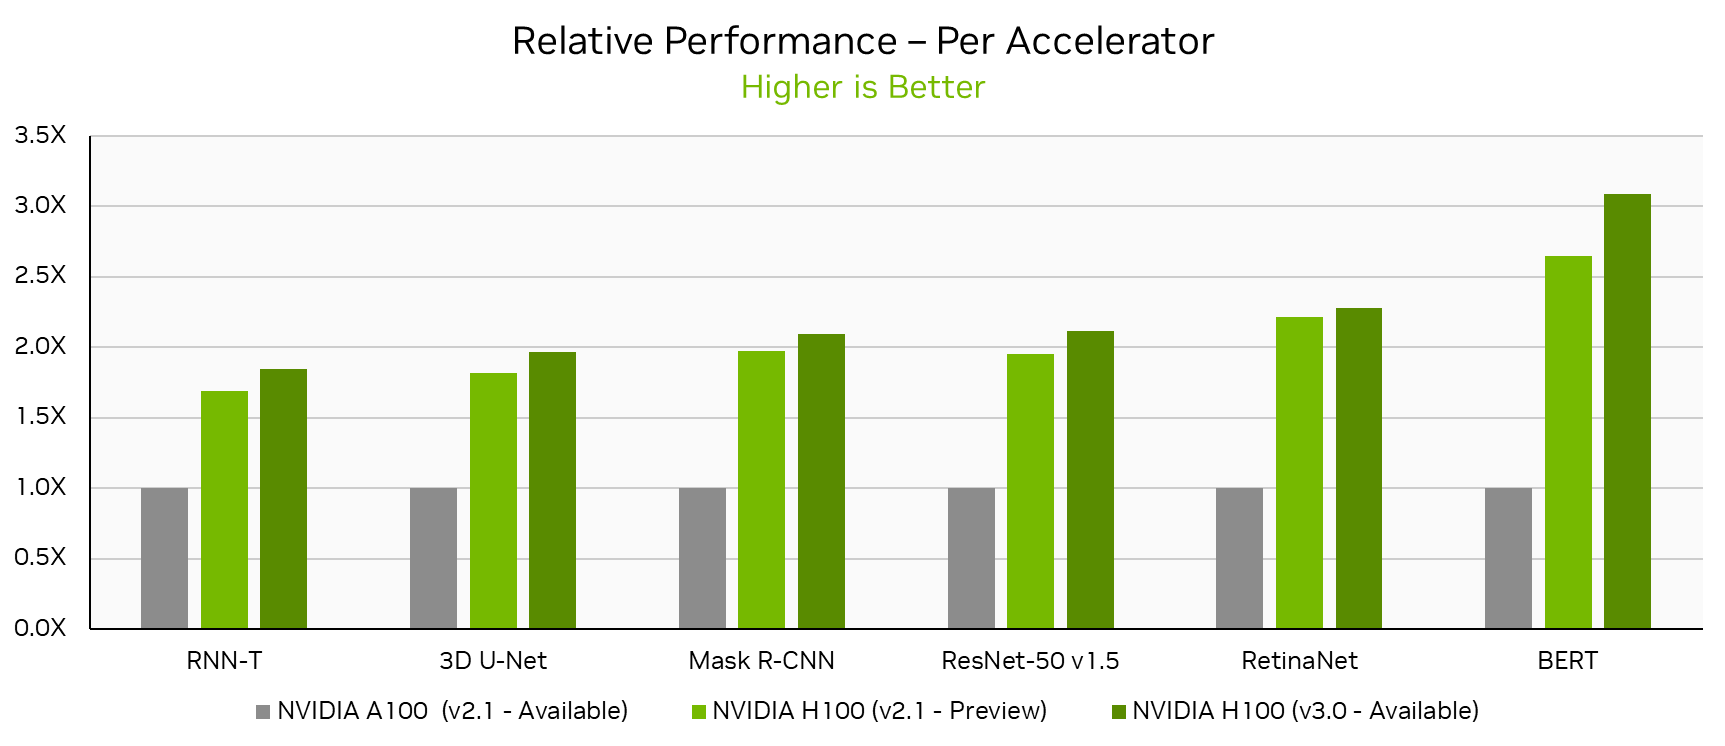 A chart of NVIDIA MLPerf Training v3.0 submission showing that NVIDIA H100 delivers up to 17% higher performance per accelerator compared to the prior H100 submission, and up to 3.1x more performance than the previous NVIDIA A100 GPU submission.